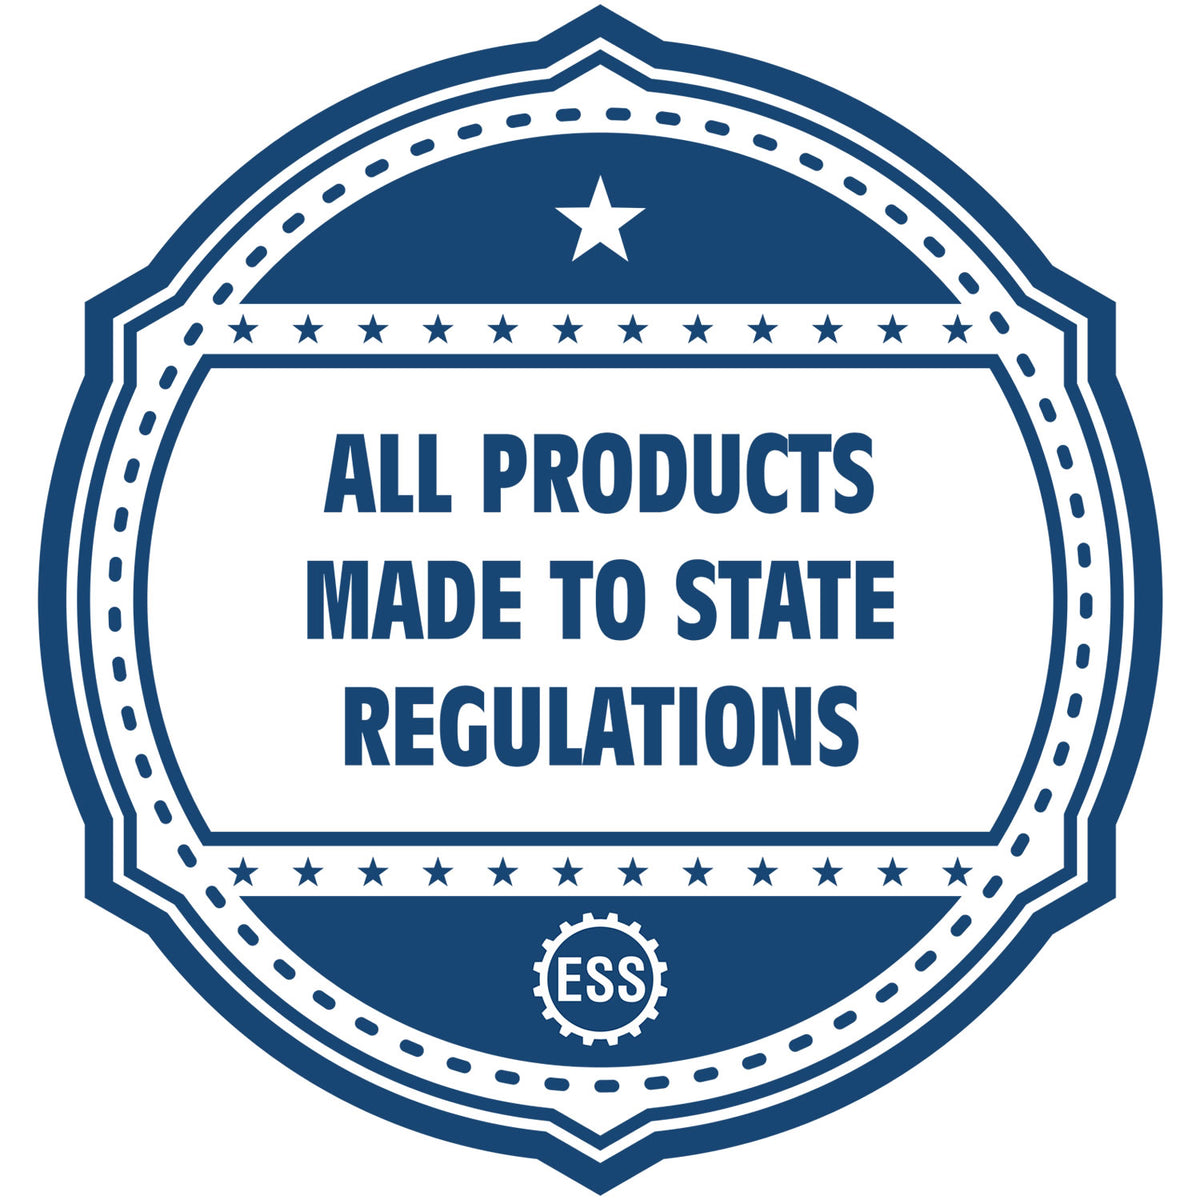 An icon or badge element for the Extended Long Reach Connecticut Architect Seal Embosser showing that this product is made in compliance with state regulations.